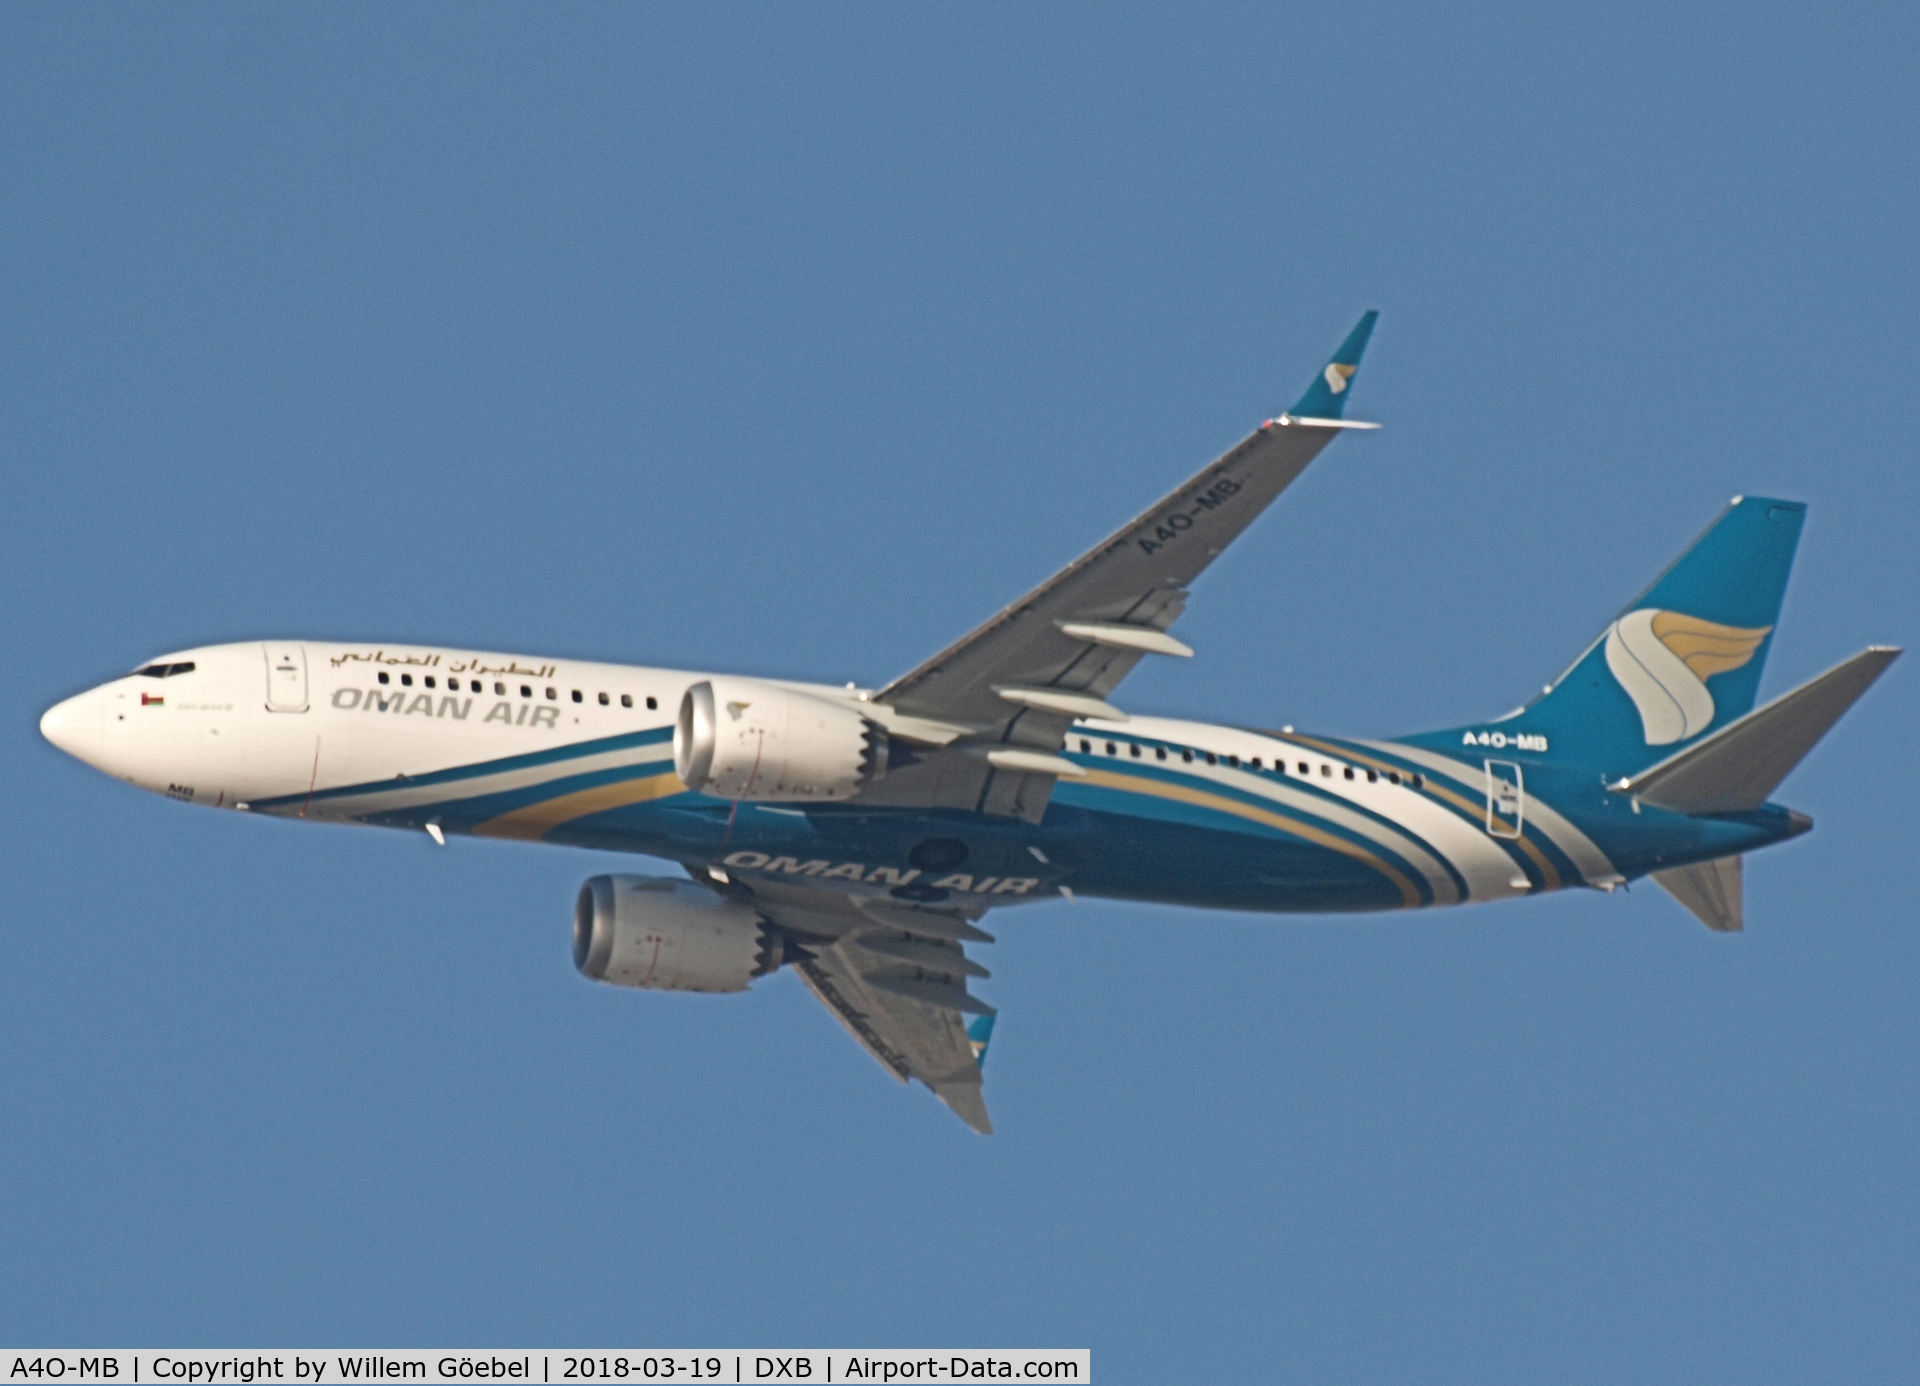 A4O-MB, 1991 Airbus A320-231 C/N 225, Take off from DUBAI INTERNATIONAL Airport